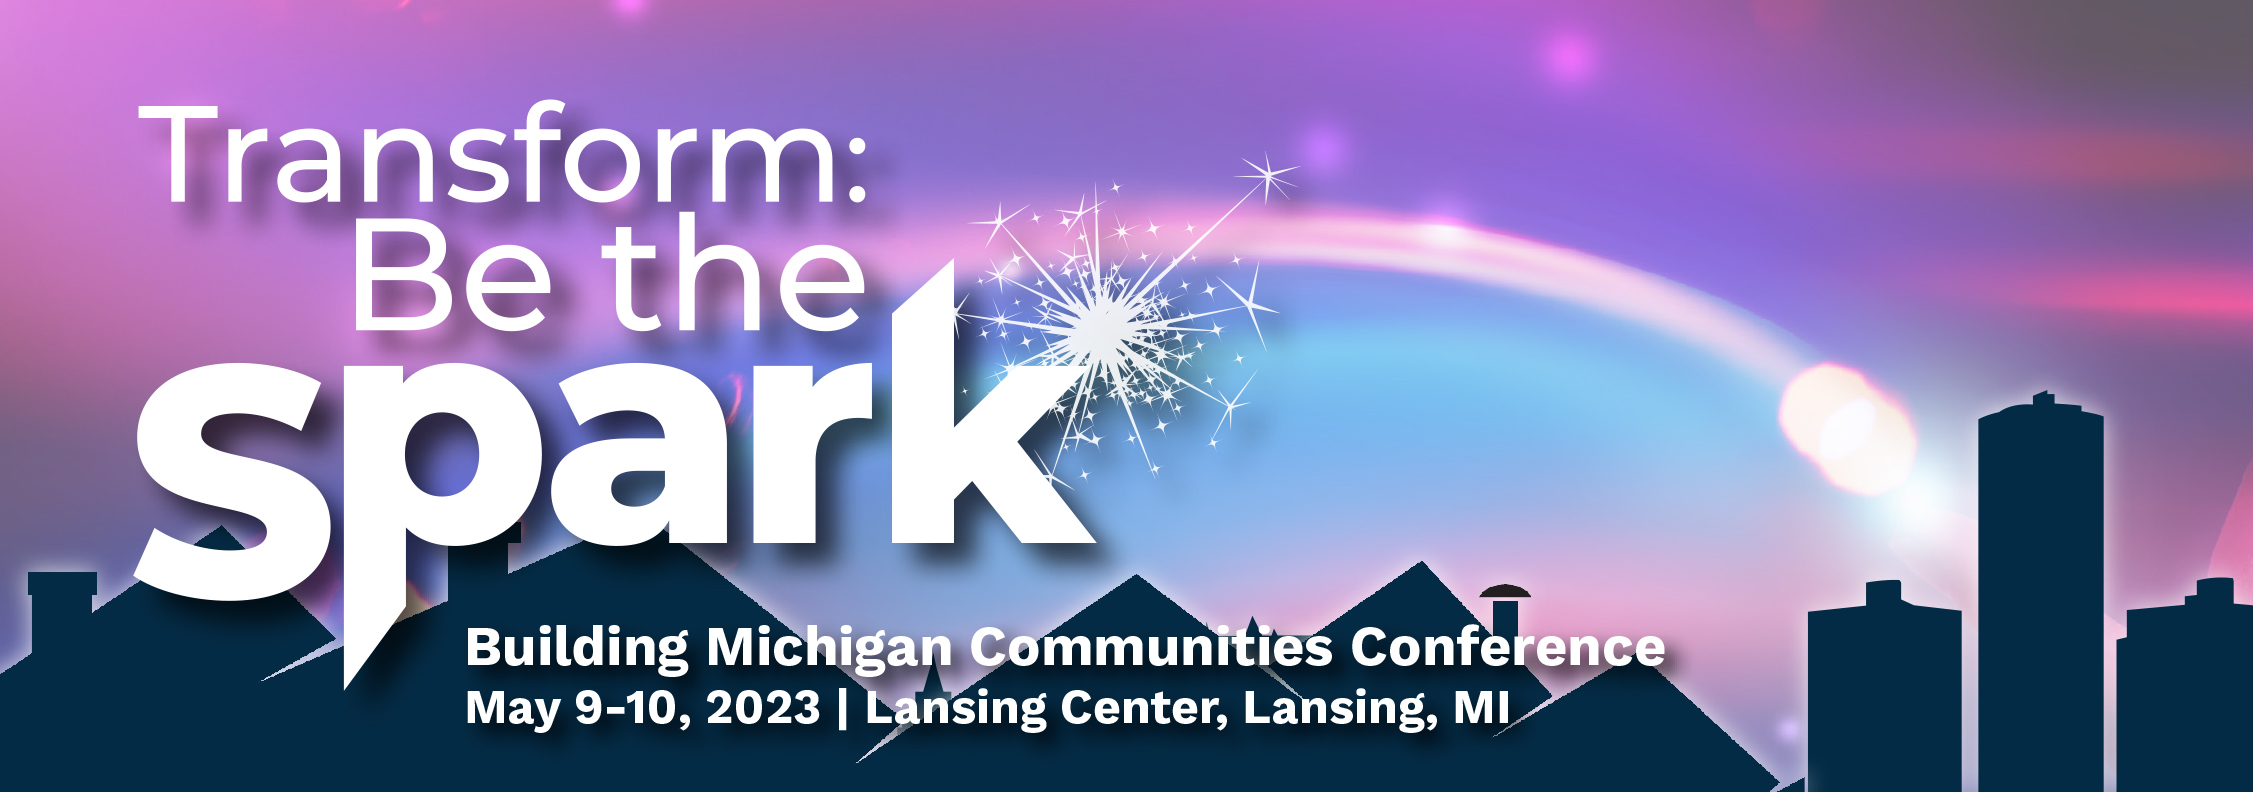 Treansform Be the Spark conference theme image